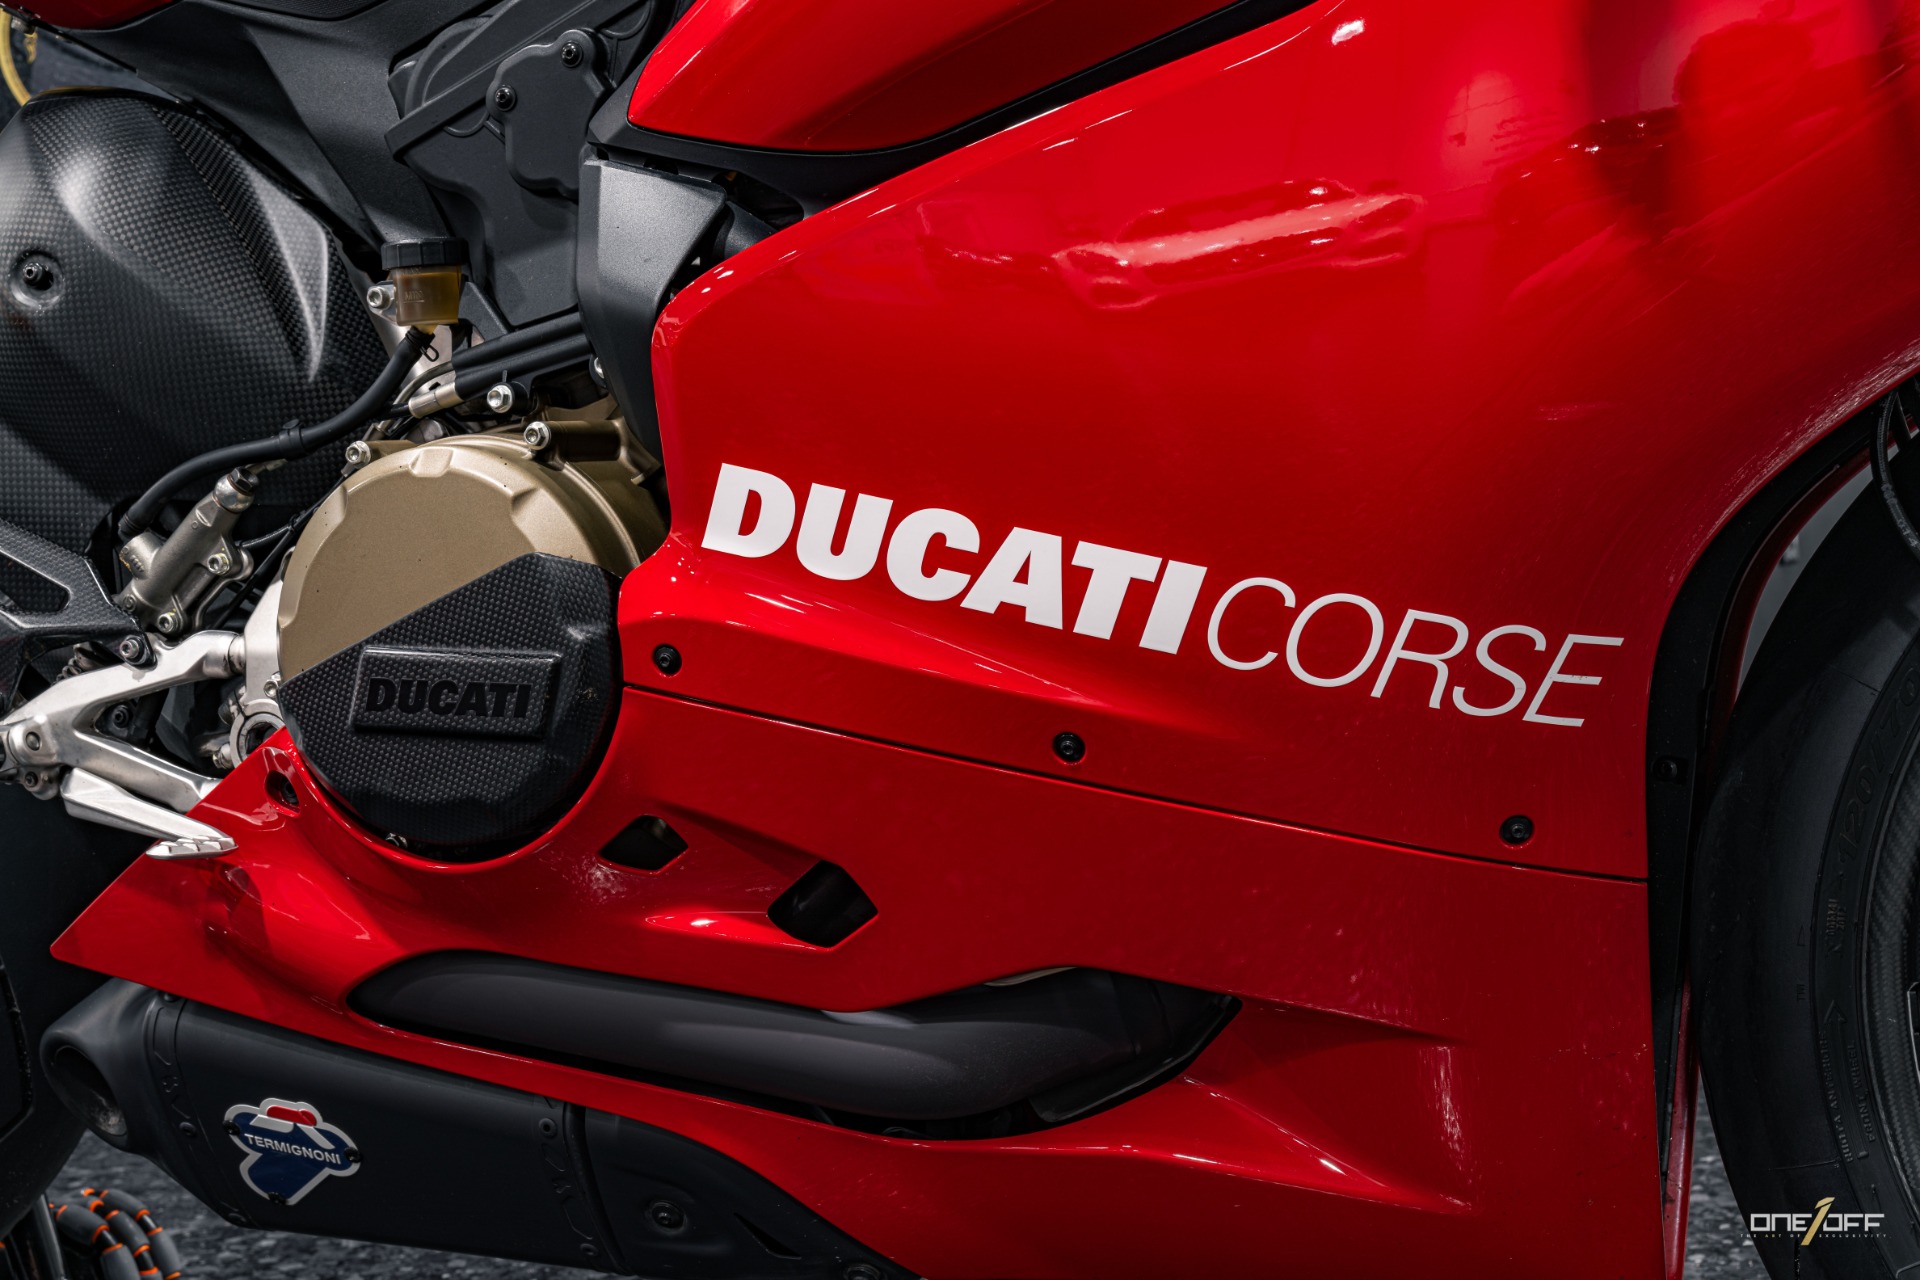 Used 2013 Ducati 1199 Panigale R One of 500 + BST $4.5K Carbon